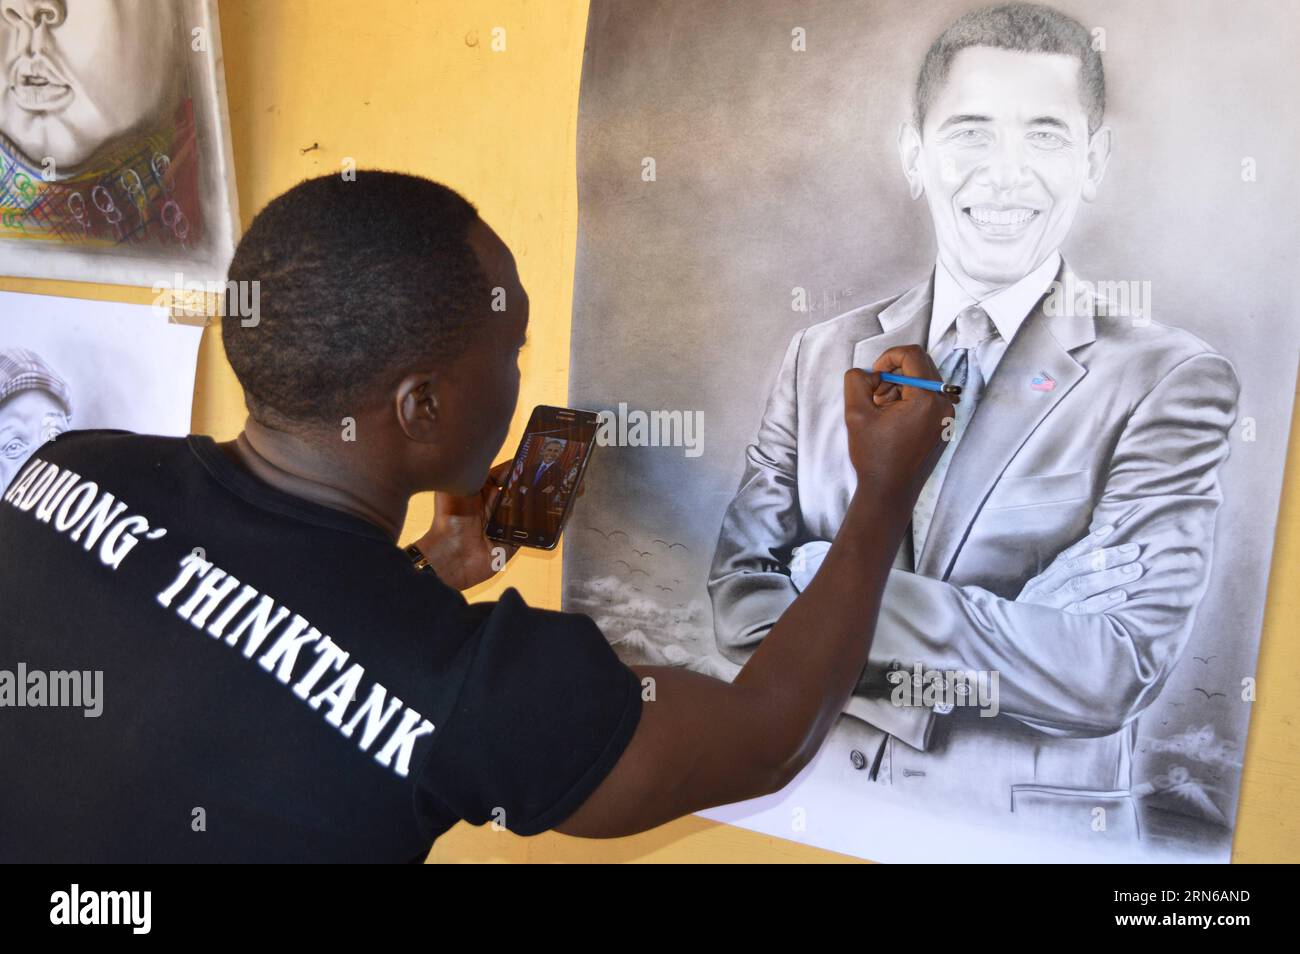 (150717) -- KISUMU, July 17, 2015 -- Collins Okello draws a portrait of U.S. President Barrack Obama at his Kisumu Art Gallery Studio in Kisumu, Kenya, July 17, 2015. Okello hopes to deliver the portrait to Obama as a gift. The upcoming maiden visit by the U.S. President Barack Obama to the land of his ancestors has elicited mixed reactions from citizens of all stripes. Obama will grace the Global Entrepreneurship Summit in Nairobi on July 25-26 in Nairobi. ) KENYA-KISUMU-OBAMA S VISIT-OPTIMISM SimbixKusimba PUBLICATIONxNOTxINxCHN   150717 Kisumu July 17 2015 Collins Okello draws a Portrait of Stock Photo